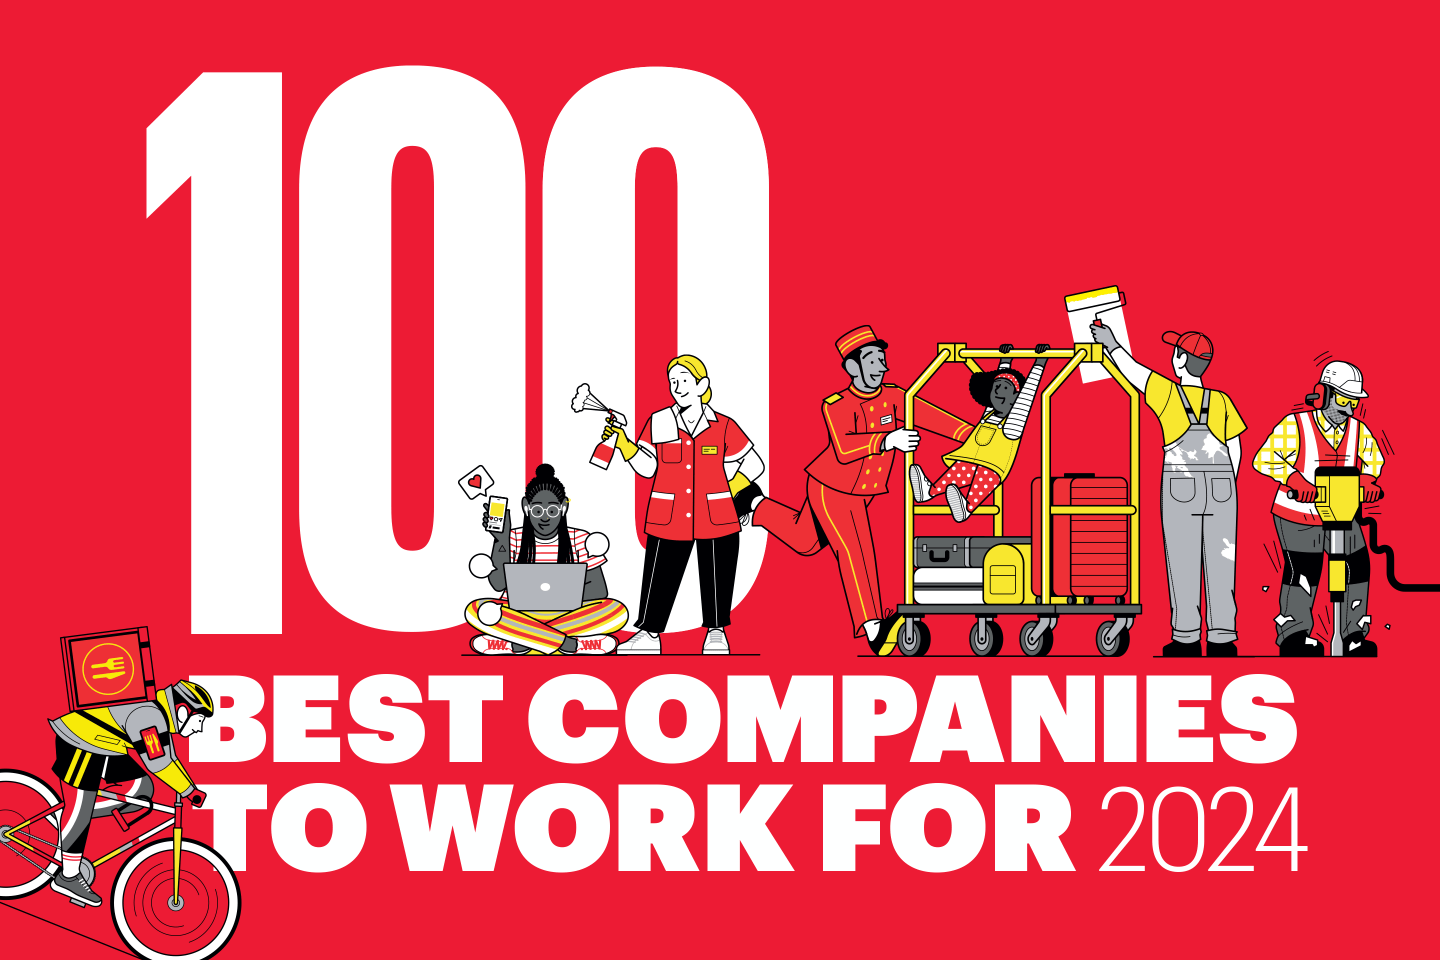 100 Best Companies to Work For logo